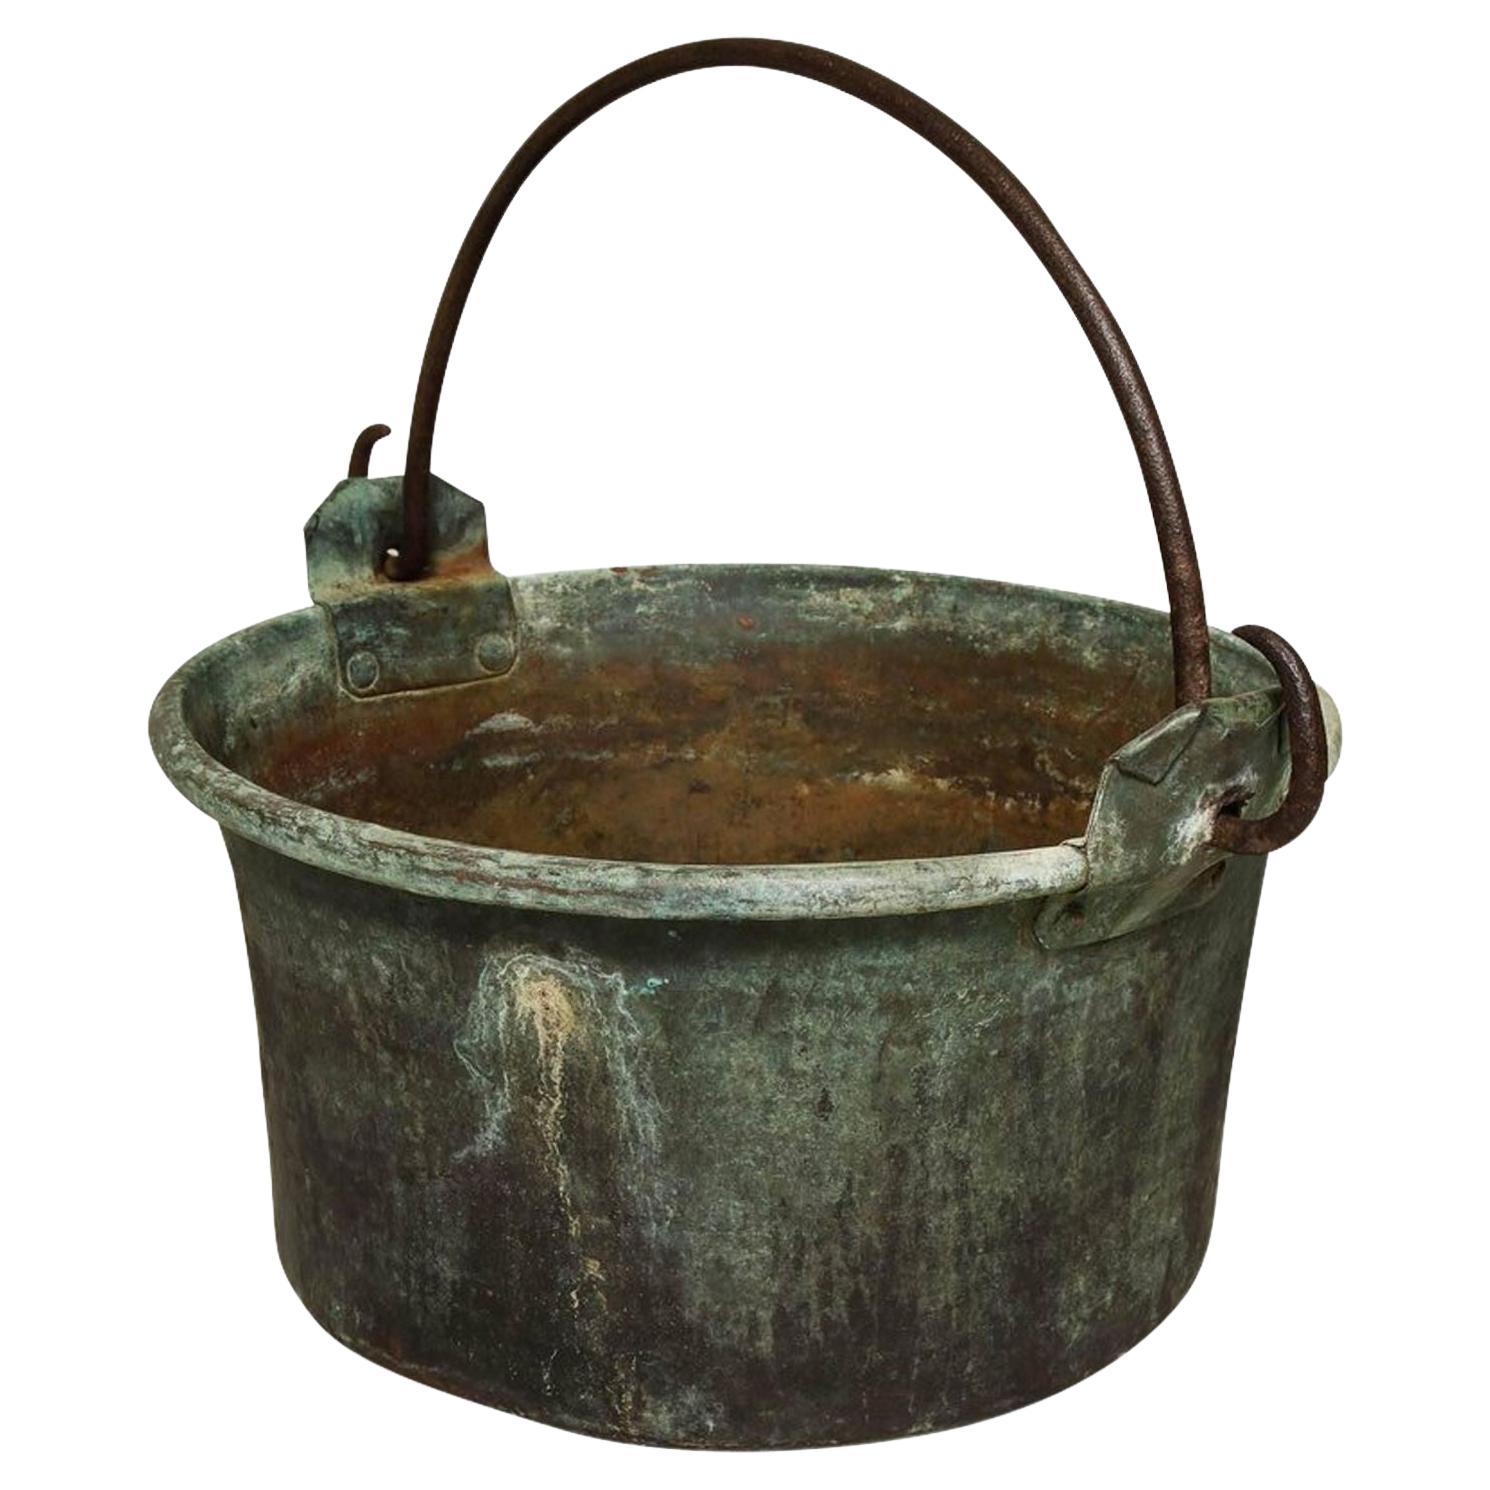 Large Patinated Copper and Wrought Iron Container